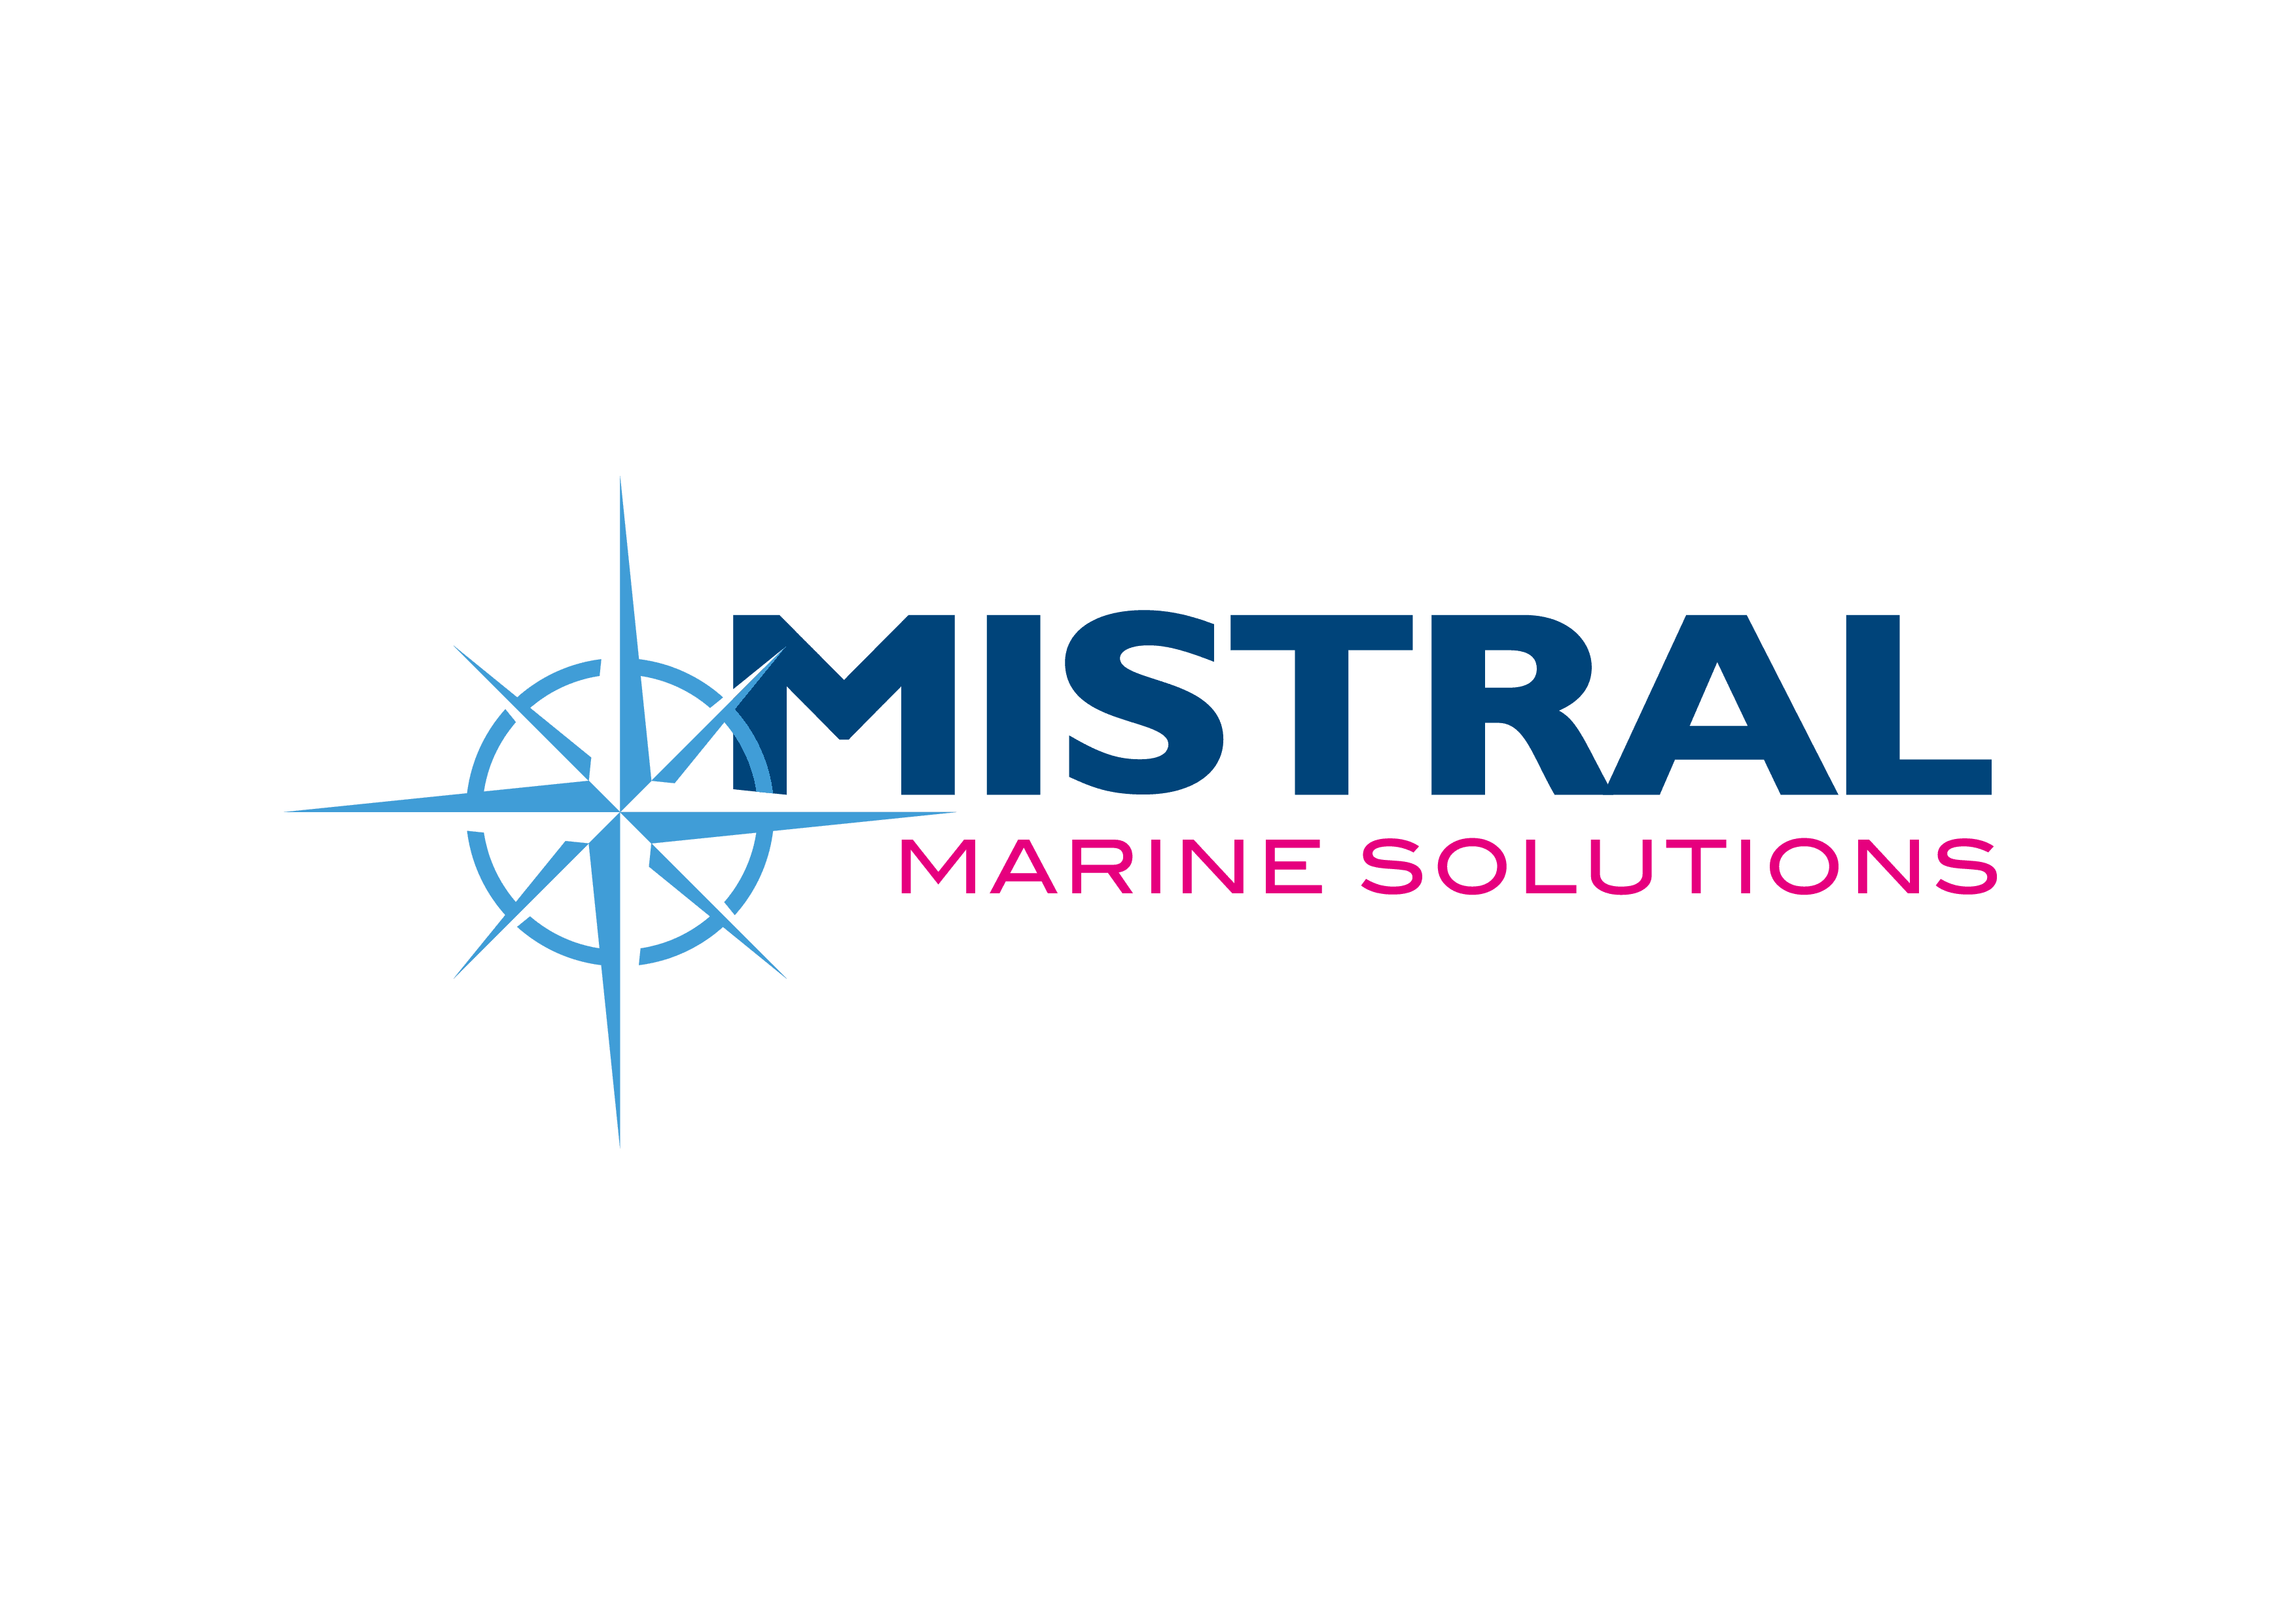 MIstral marine solutions a greenoil partner in italy